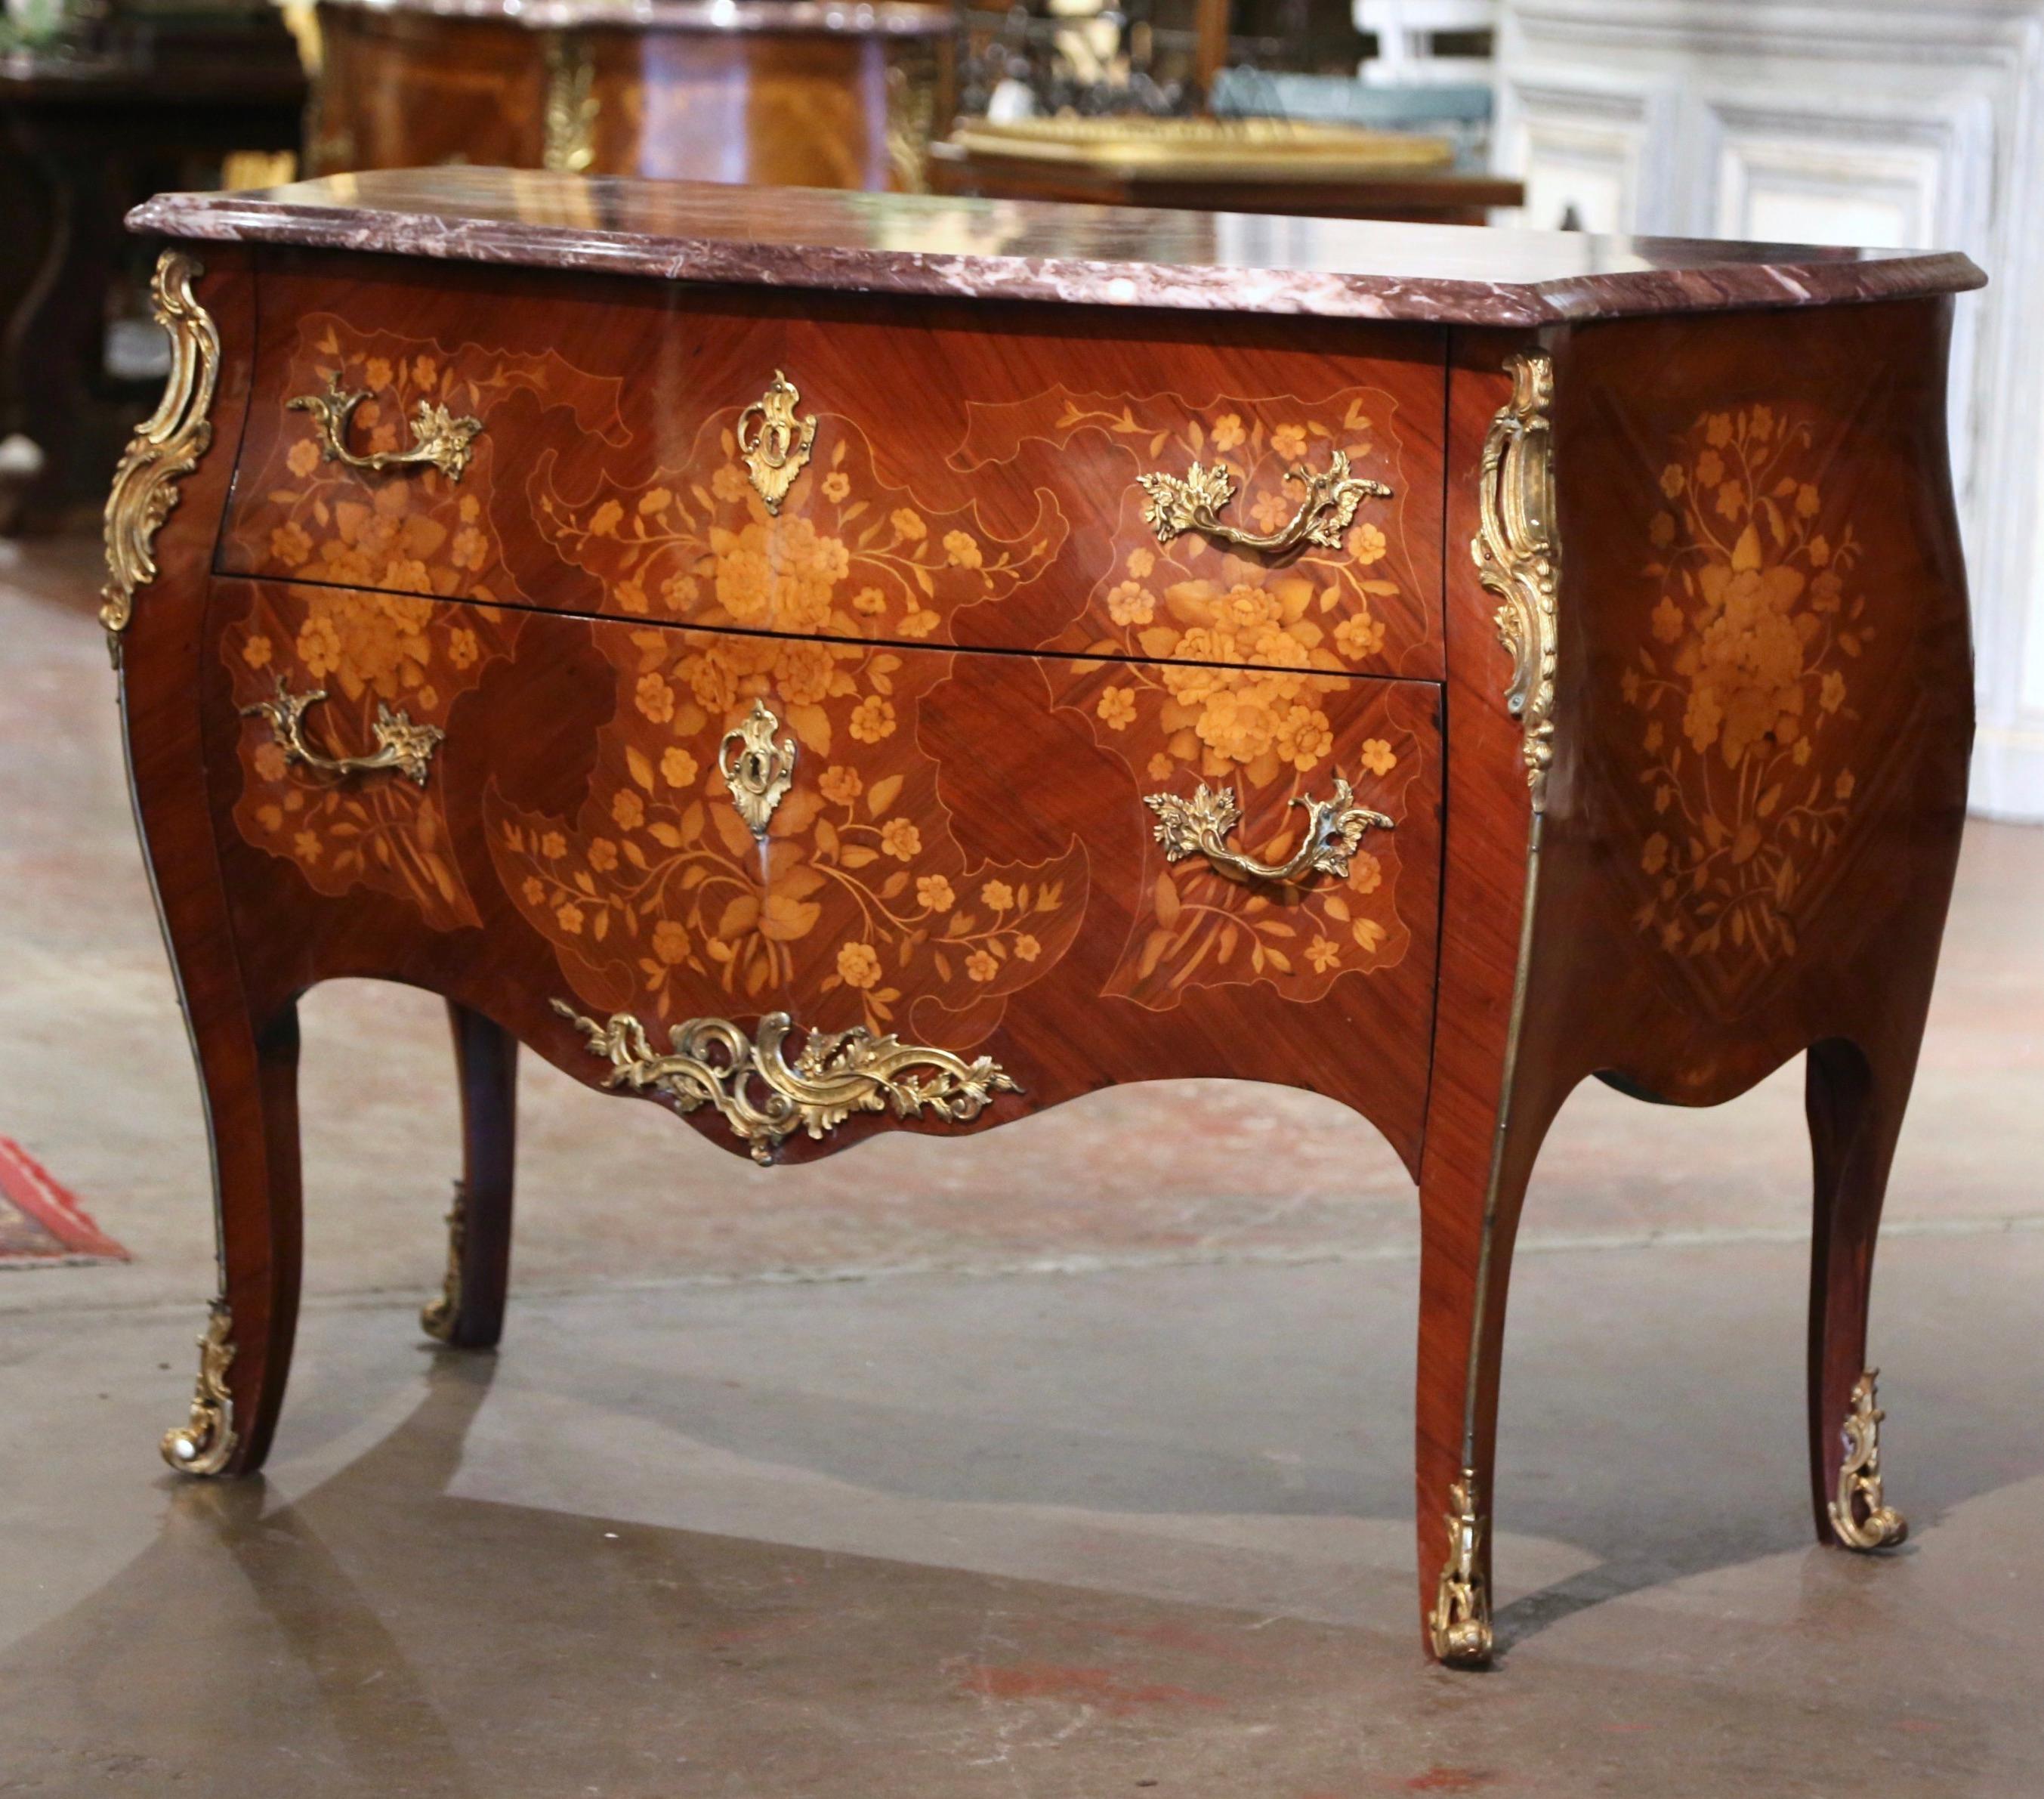 Crafted in France circa 1980, the vintage commode stands on cabriole legs ending with bronze mounts feet, over a scalloped apron decorated with a bronze shell and leaf motif mount. The fruit wood chest features two bombe drawers across the front